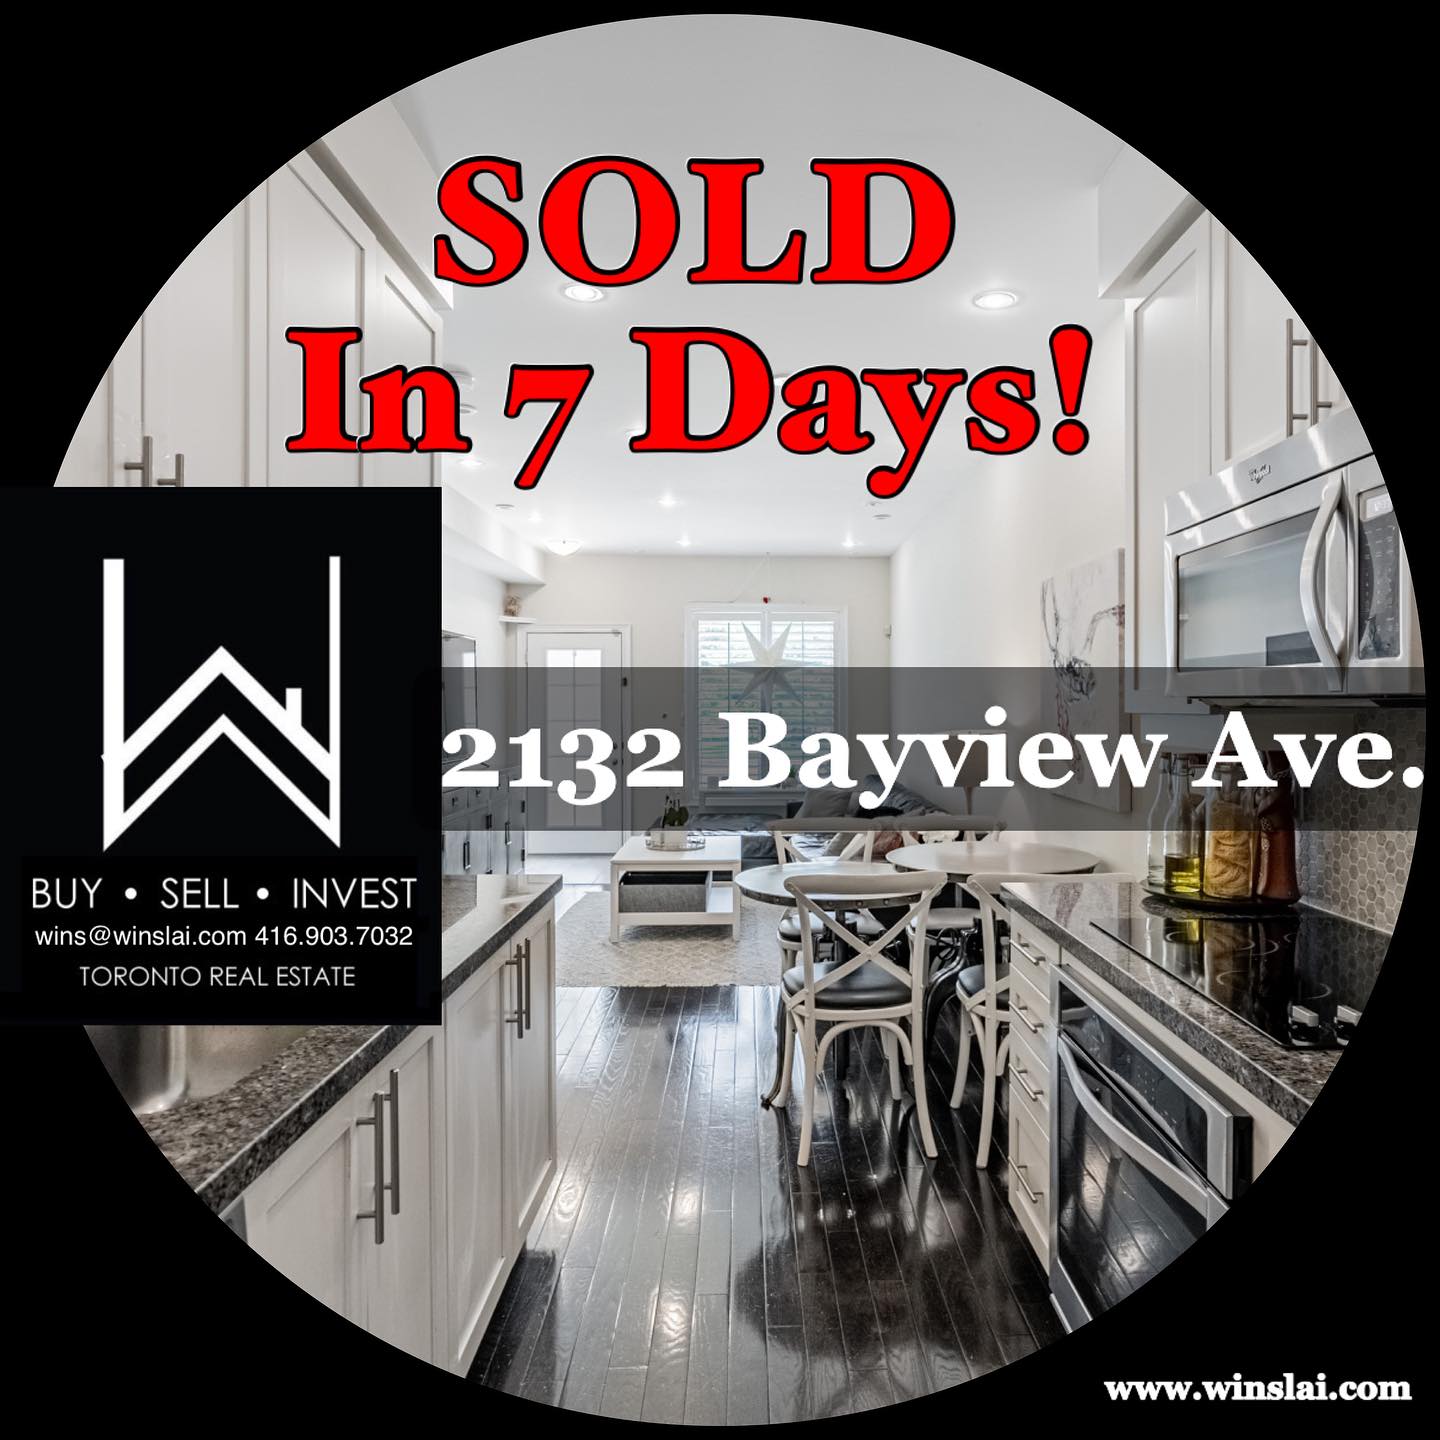 Sold flyer for 2132 Bayview Avenue listing.